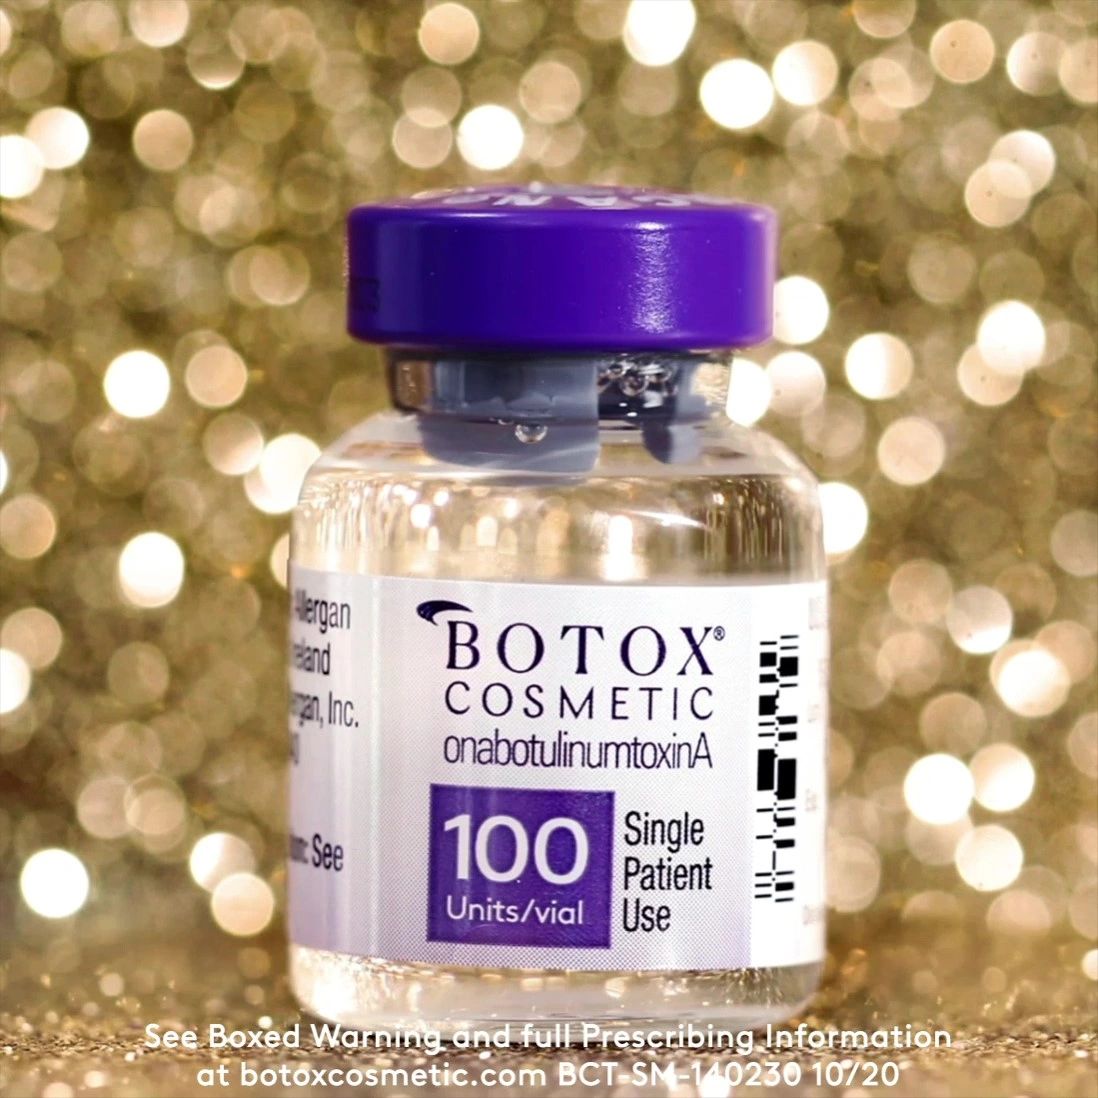 
BOTOX® COSMETIC injections are used to minimize the appearance of wrinkles and fine lines in the fo